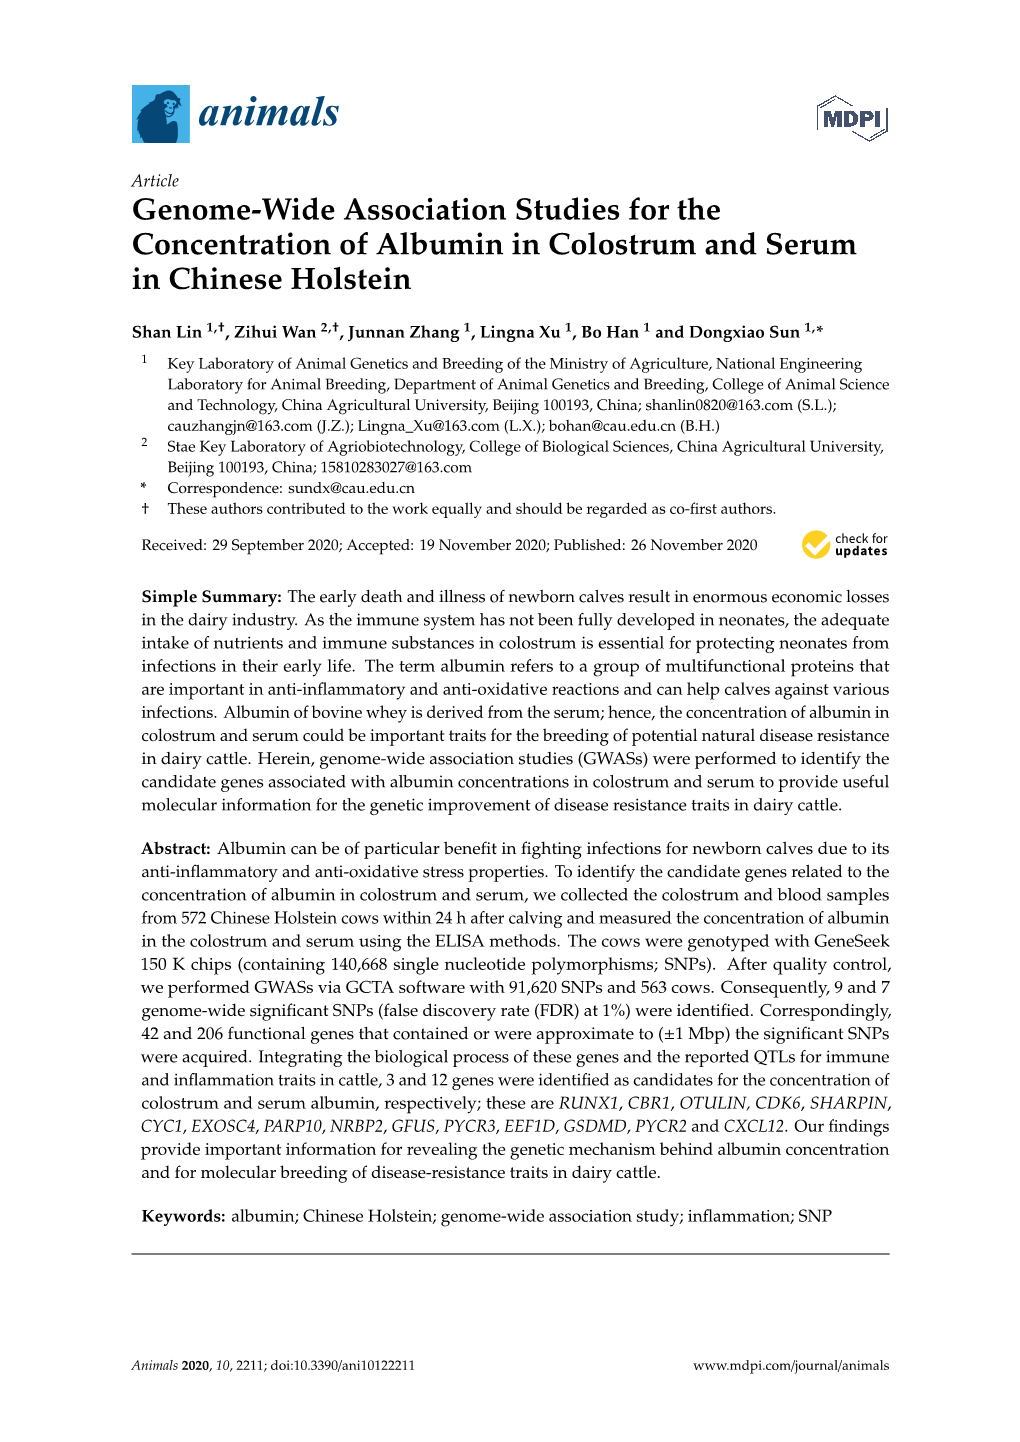 Genome-Wide Association Studies for the Concentration of Albumin in Colostrum and Serum in Chinese Holstein